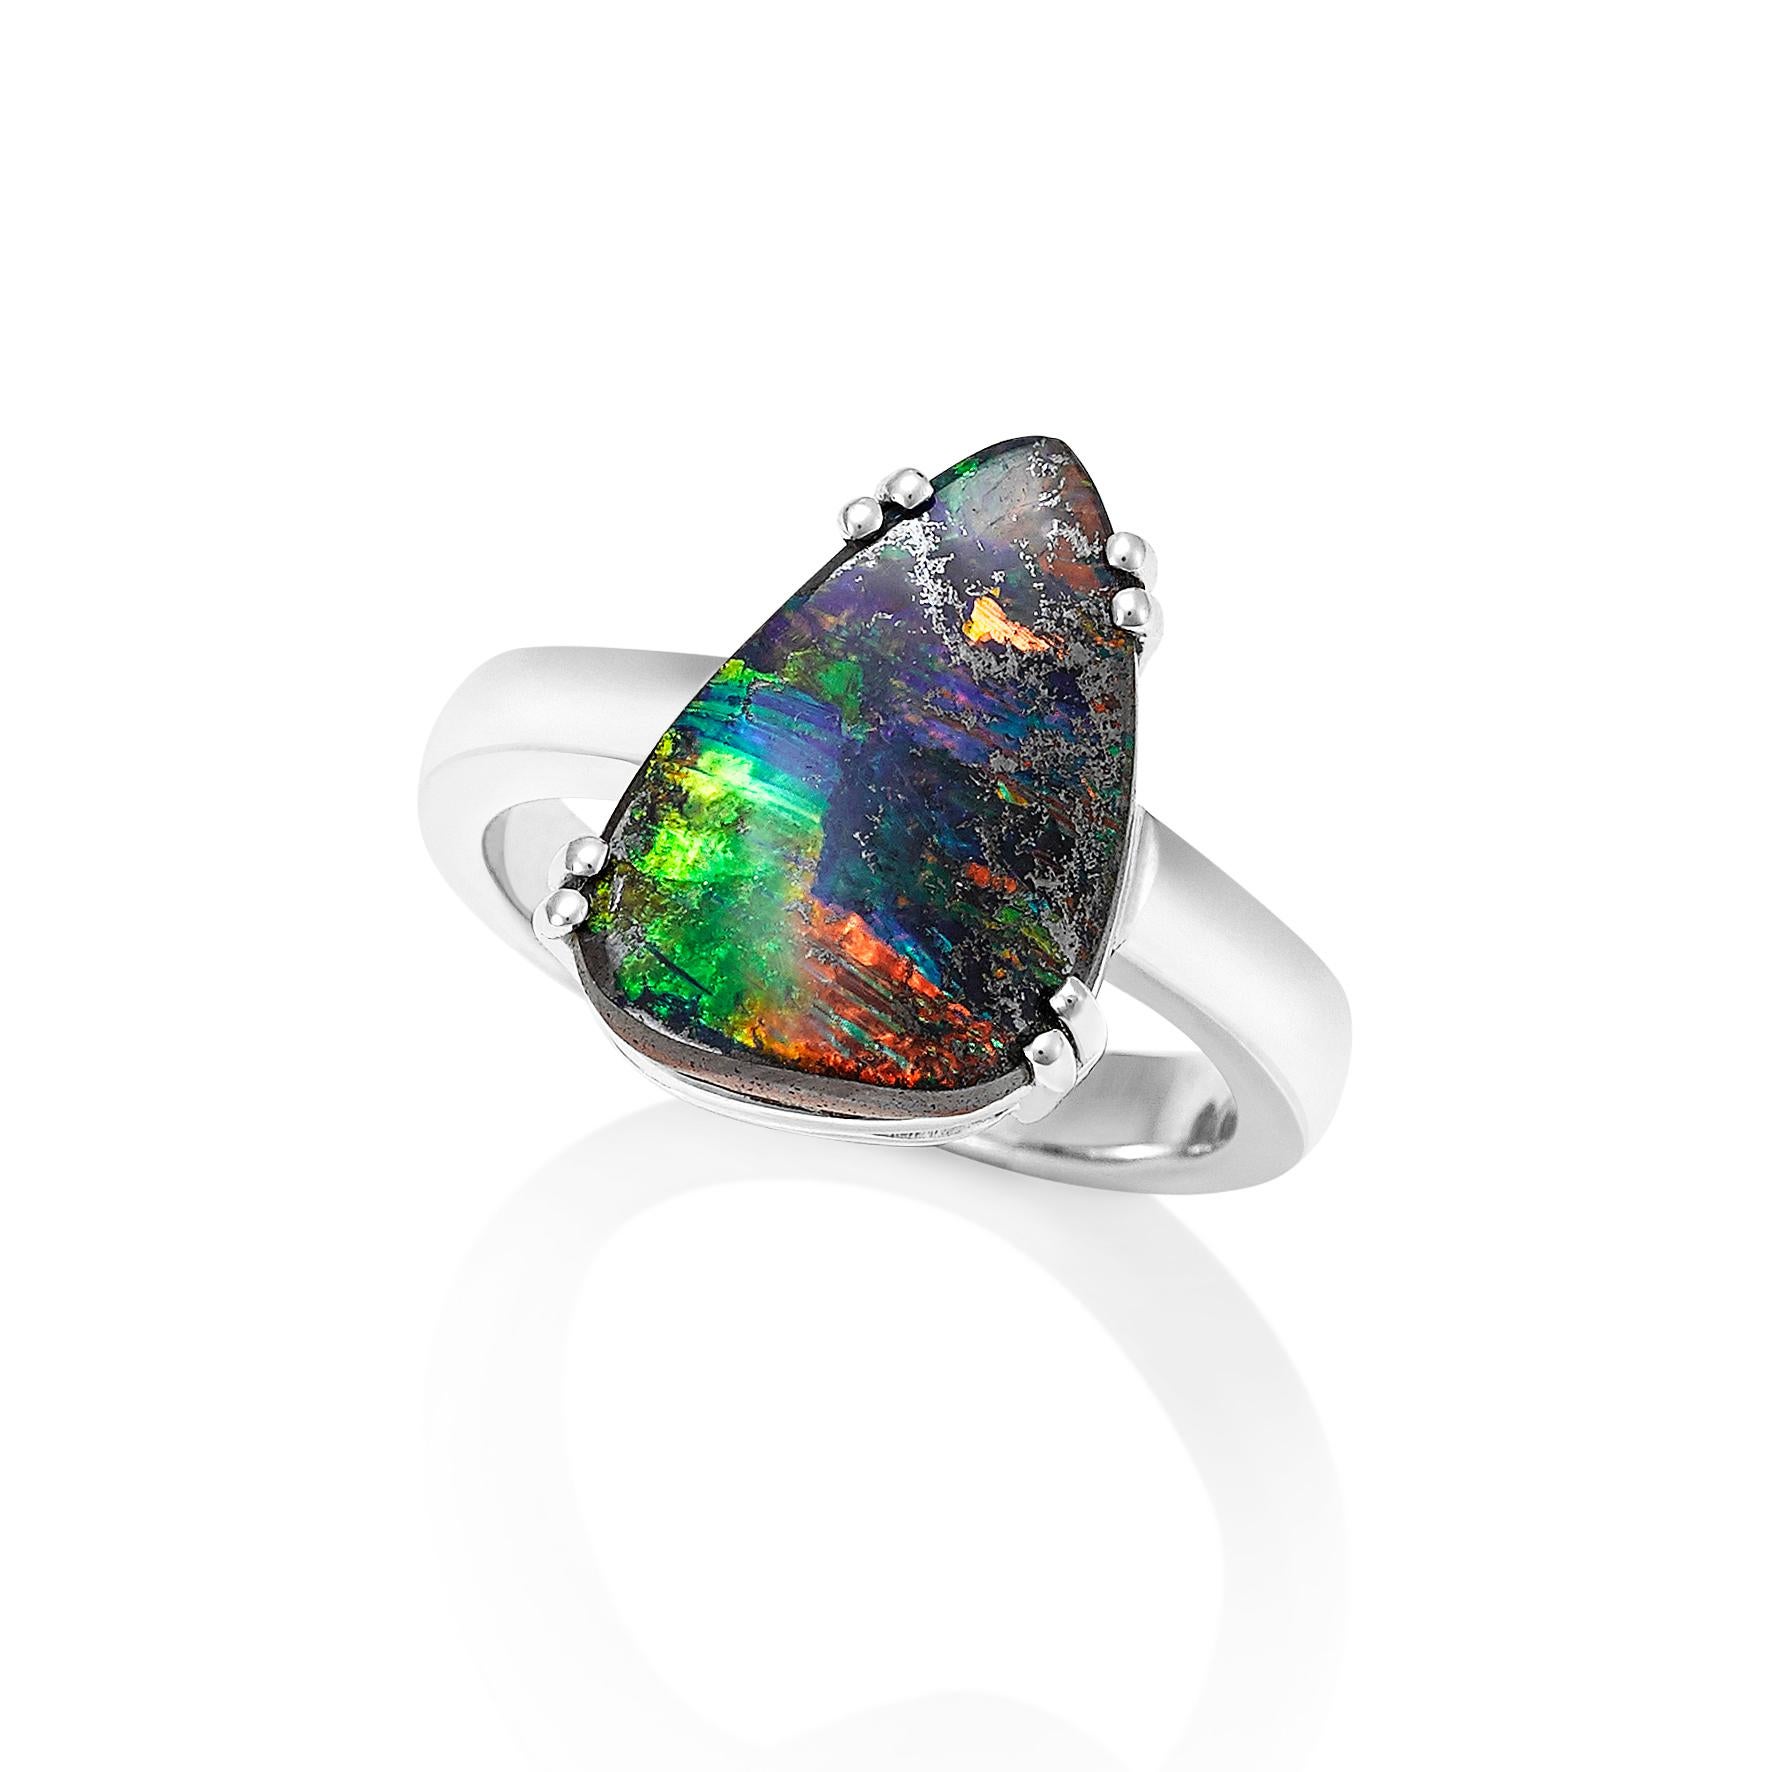 Giulians contemporary 18 karat Australian Boulder Opal Ring.  This cocktail ring showcases a 4.80ct natural solid boulder opal, from Queensland, with mysterious blue, green and red fire.  The opal has been prong set  within a handmade 18 karat white